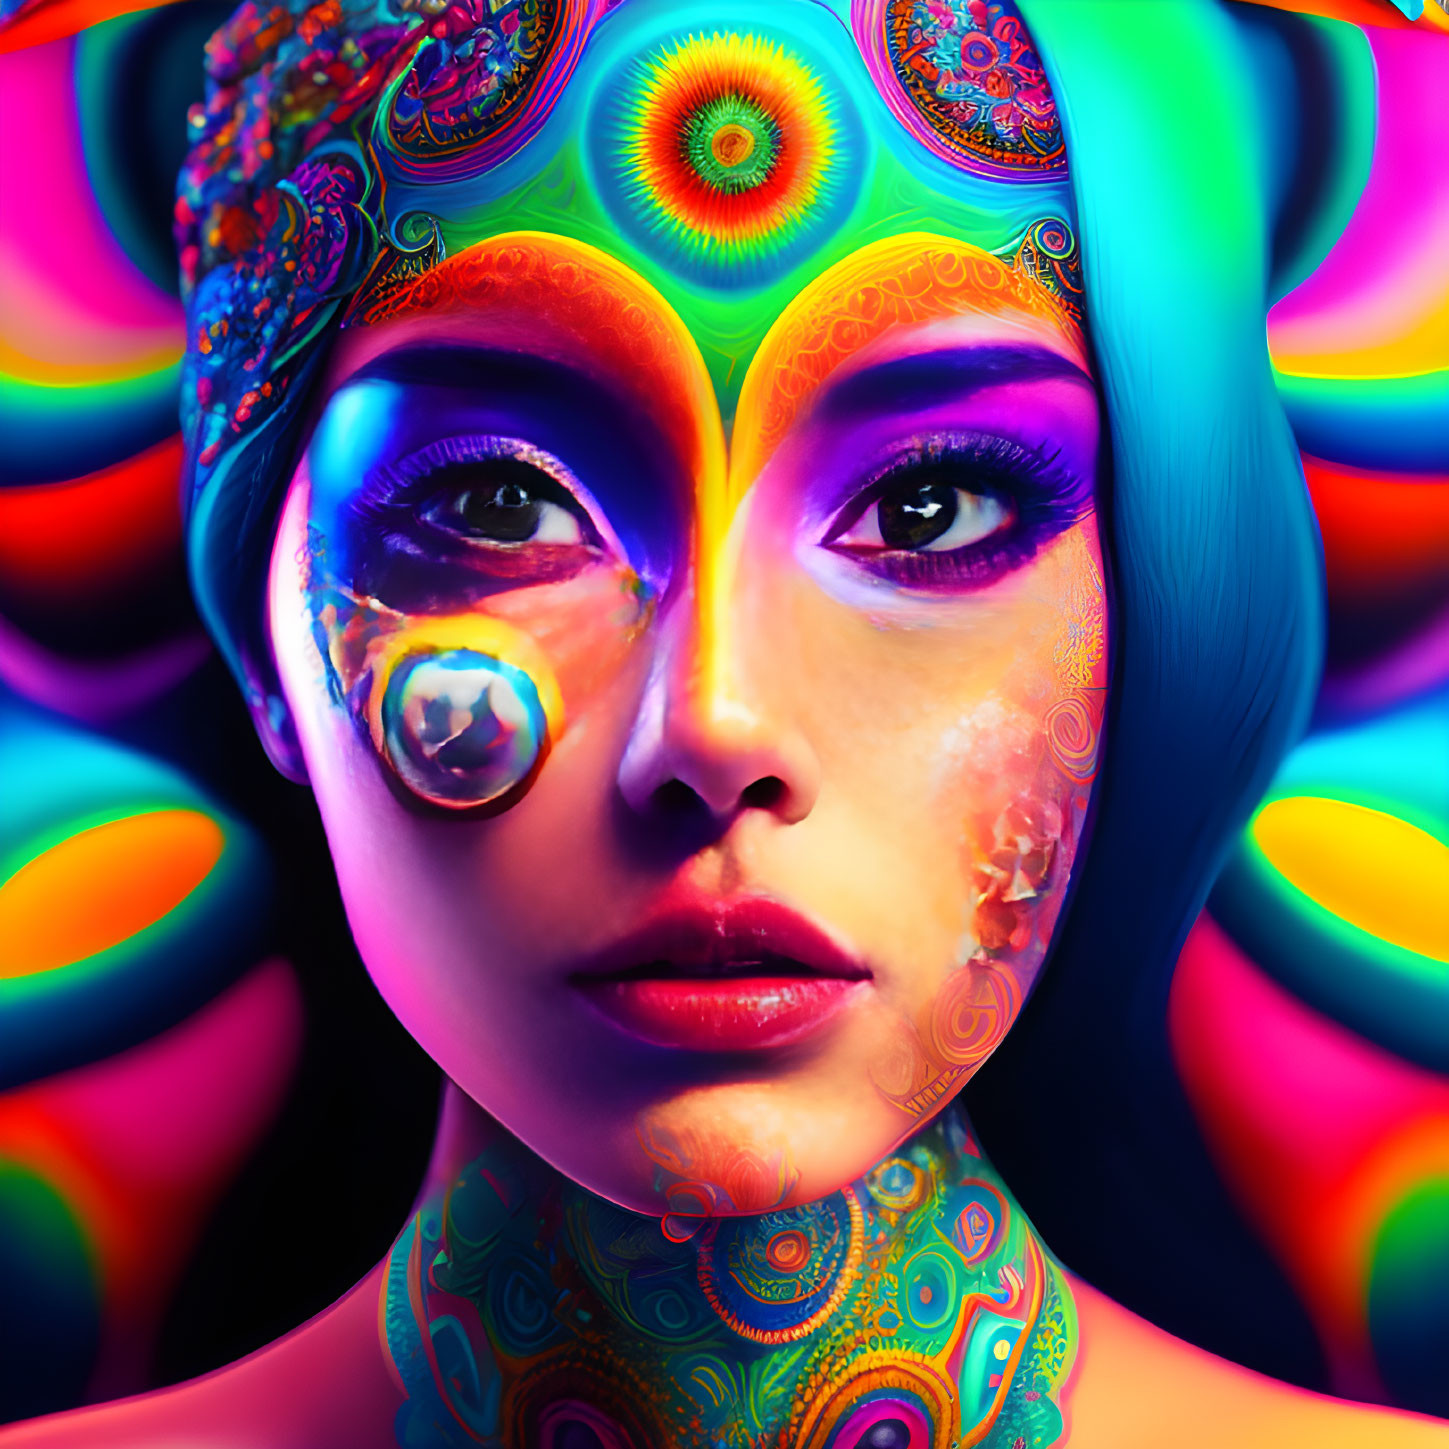 Colorful digital portrait of a woman with psychedelic skin patterns.